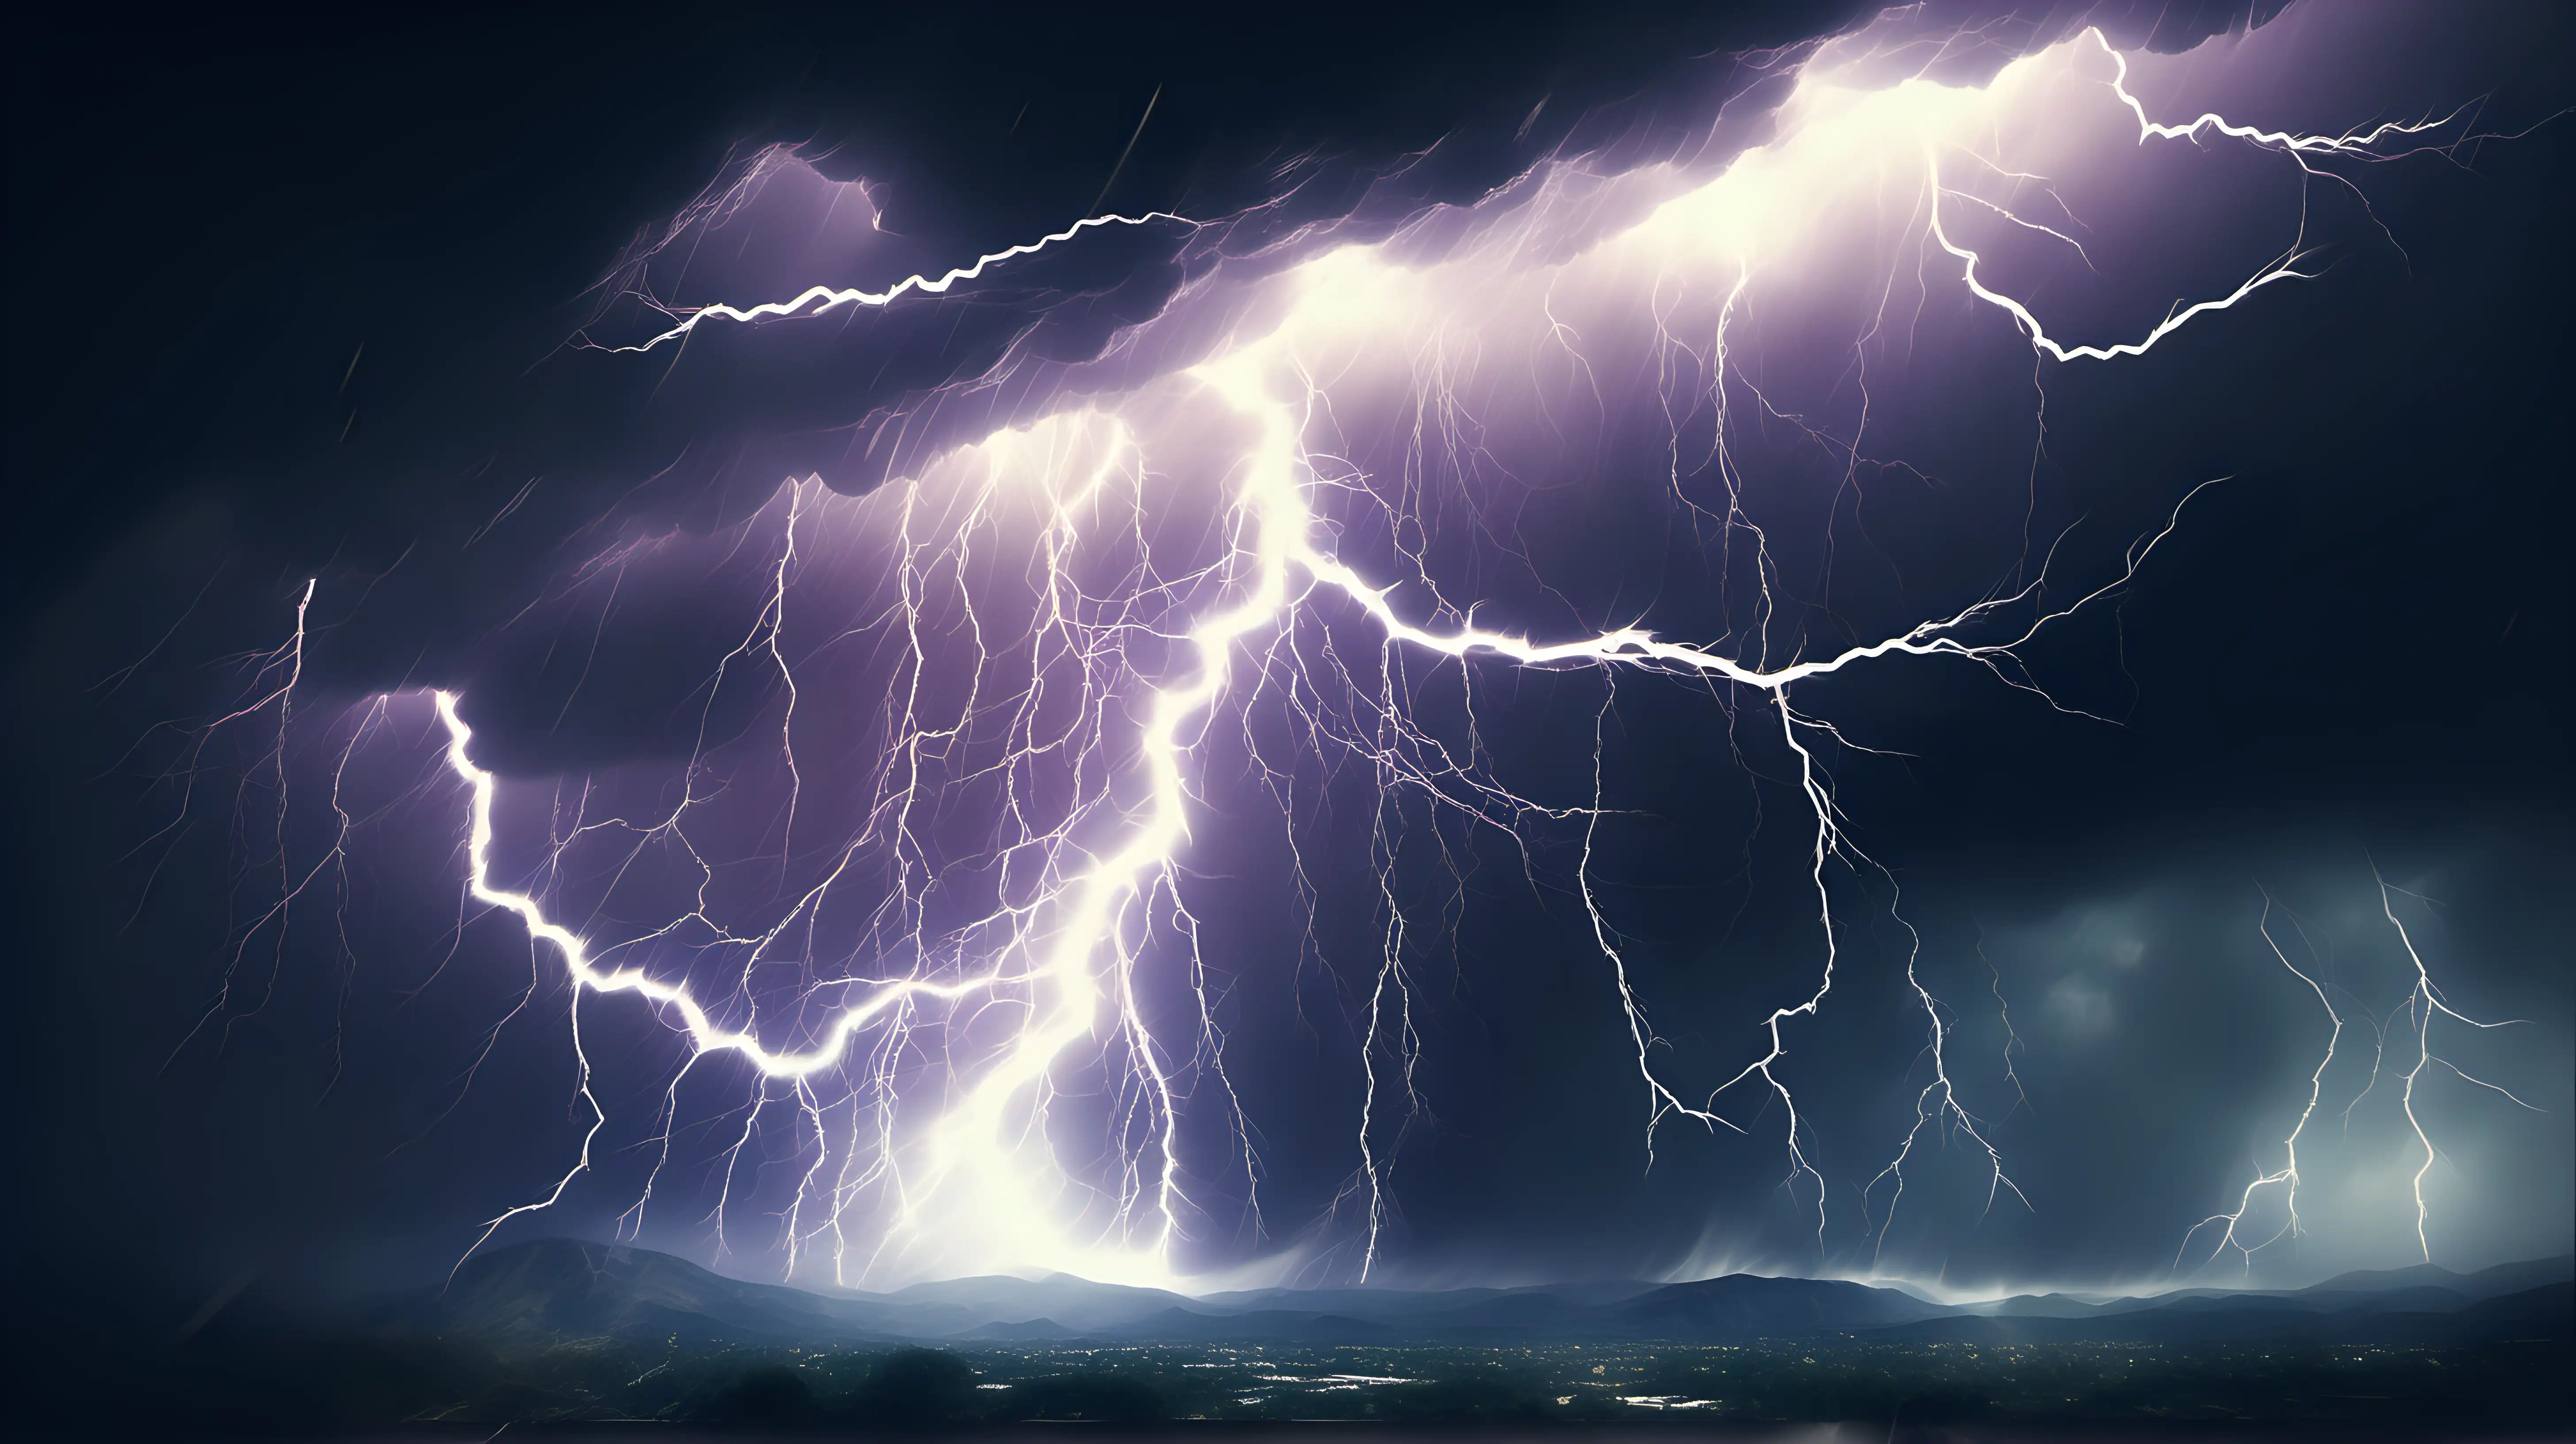 Dynamic Thunderstorm Abstract Background with Lightning Bolts and Swirling Clouds